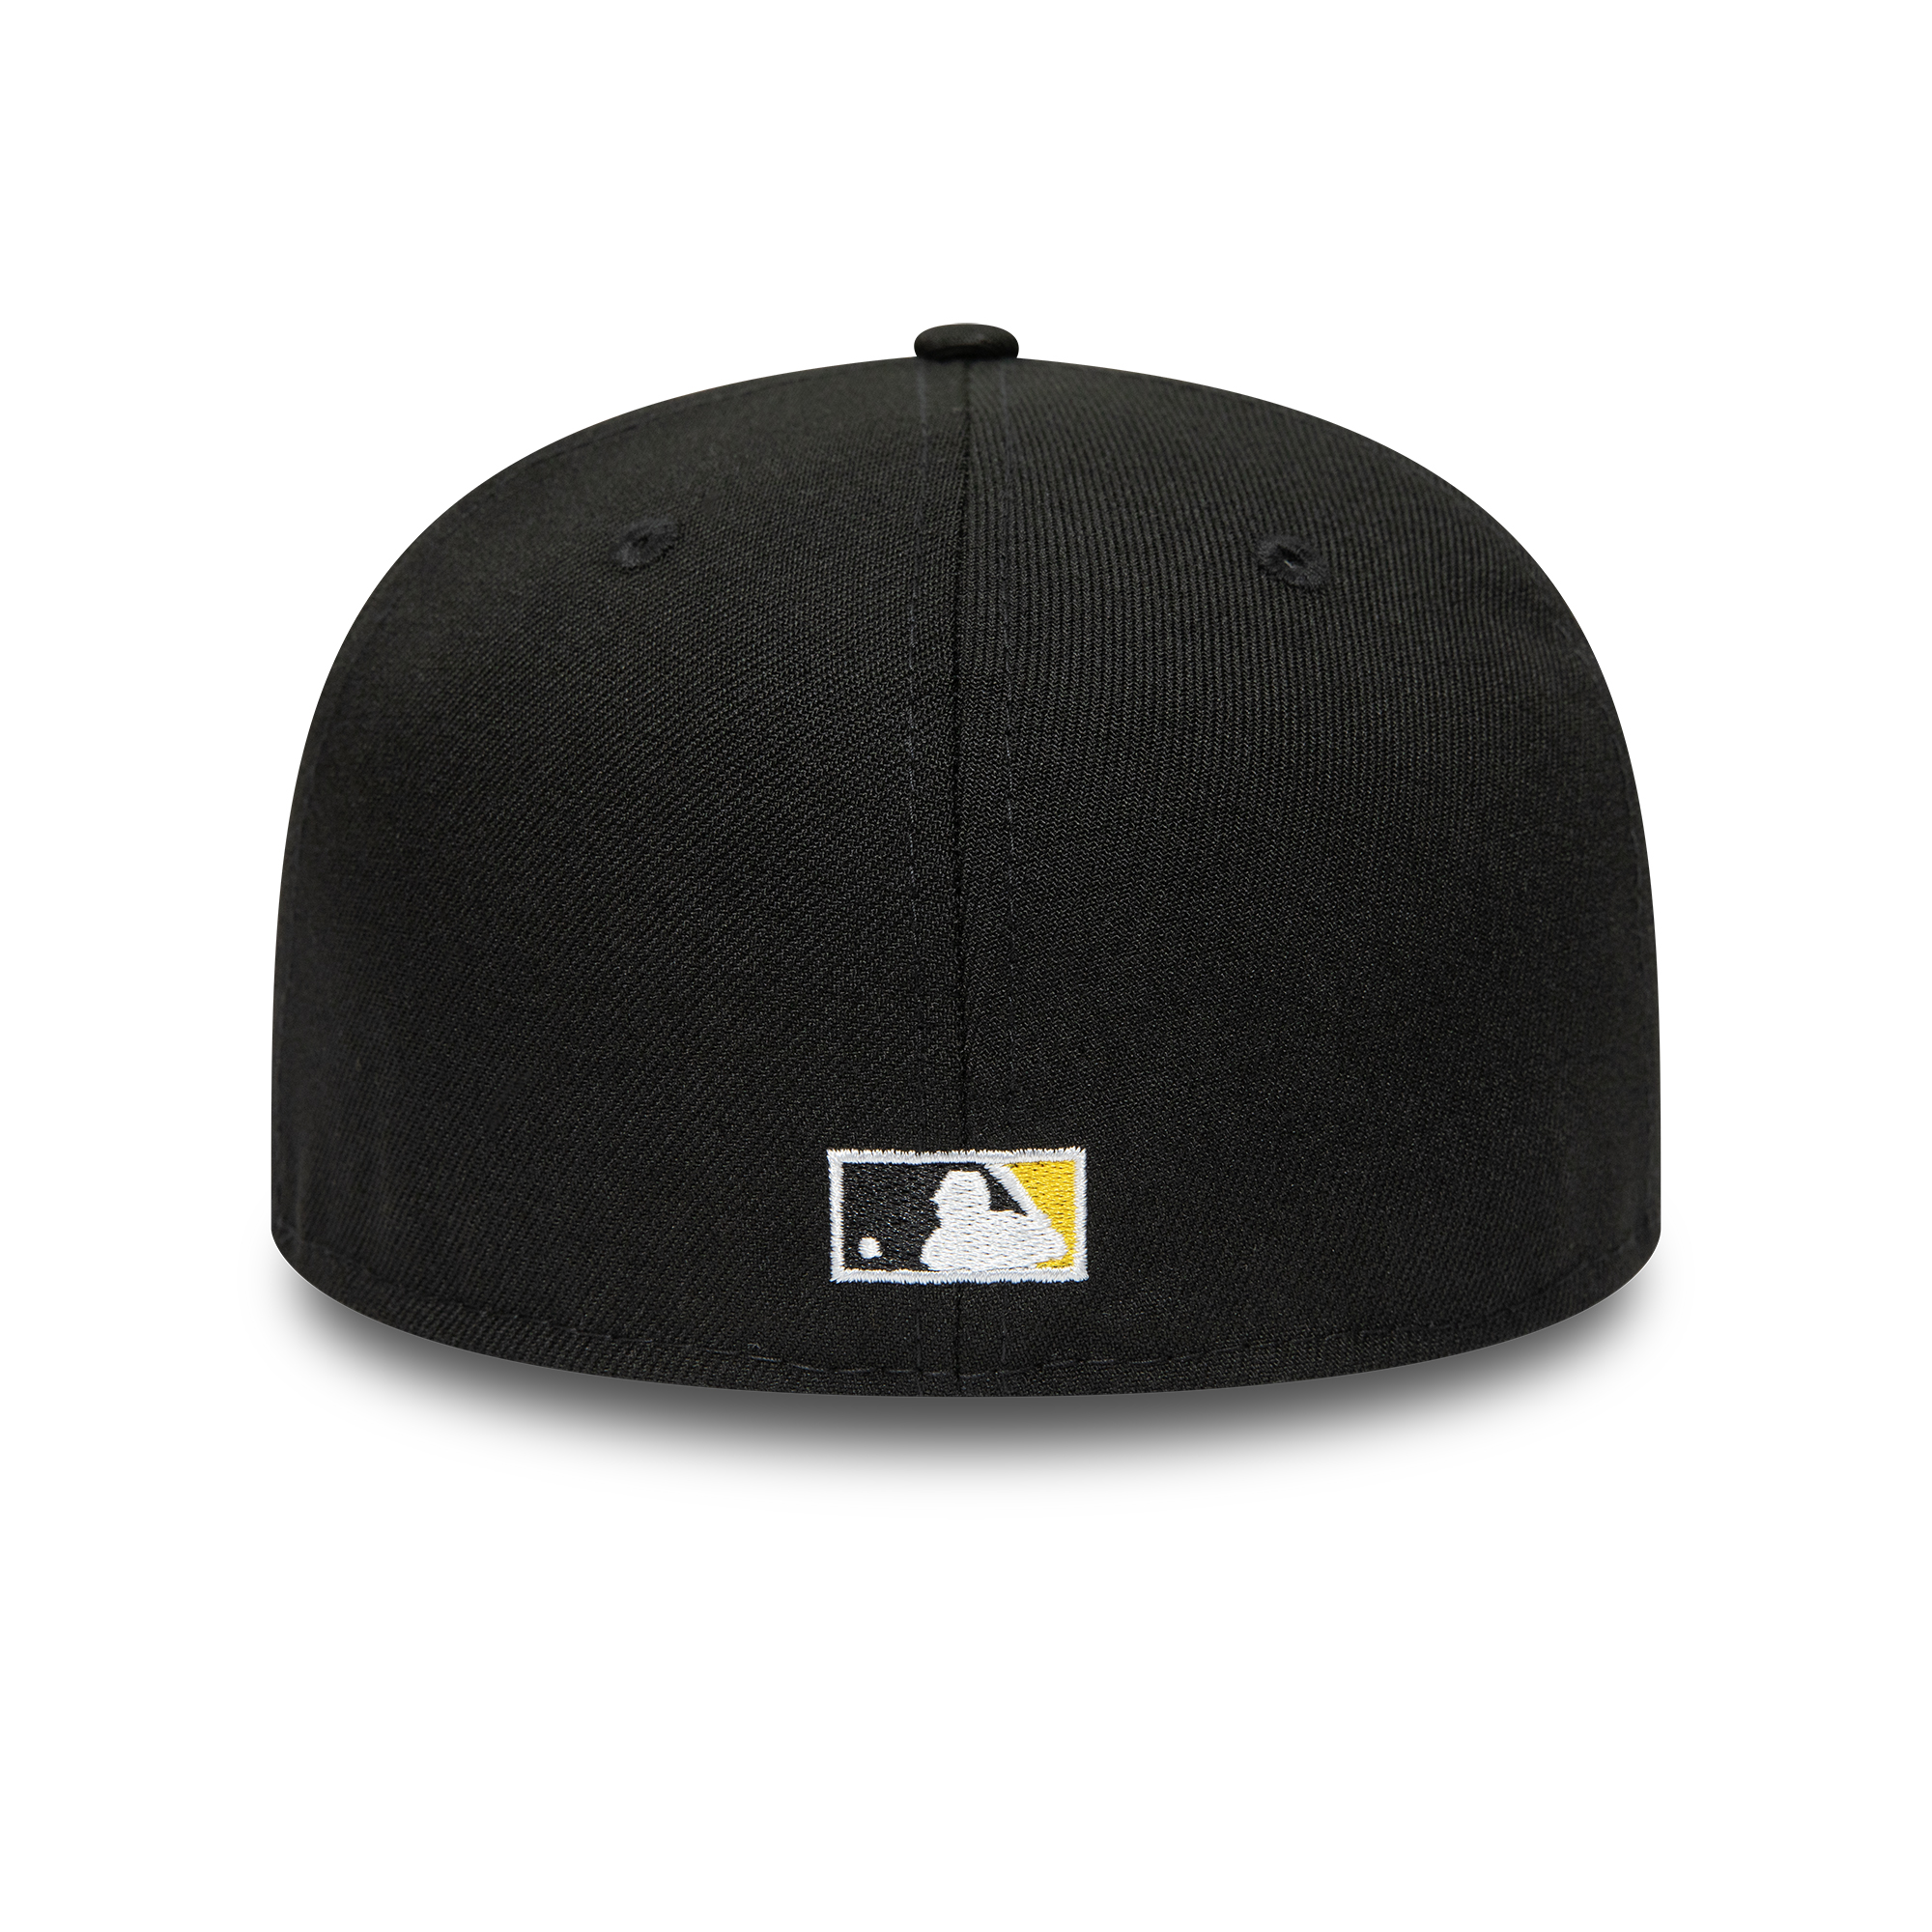 Pittsburgh Pirates National League Stadium Black 59FIFTY Fitted Cap